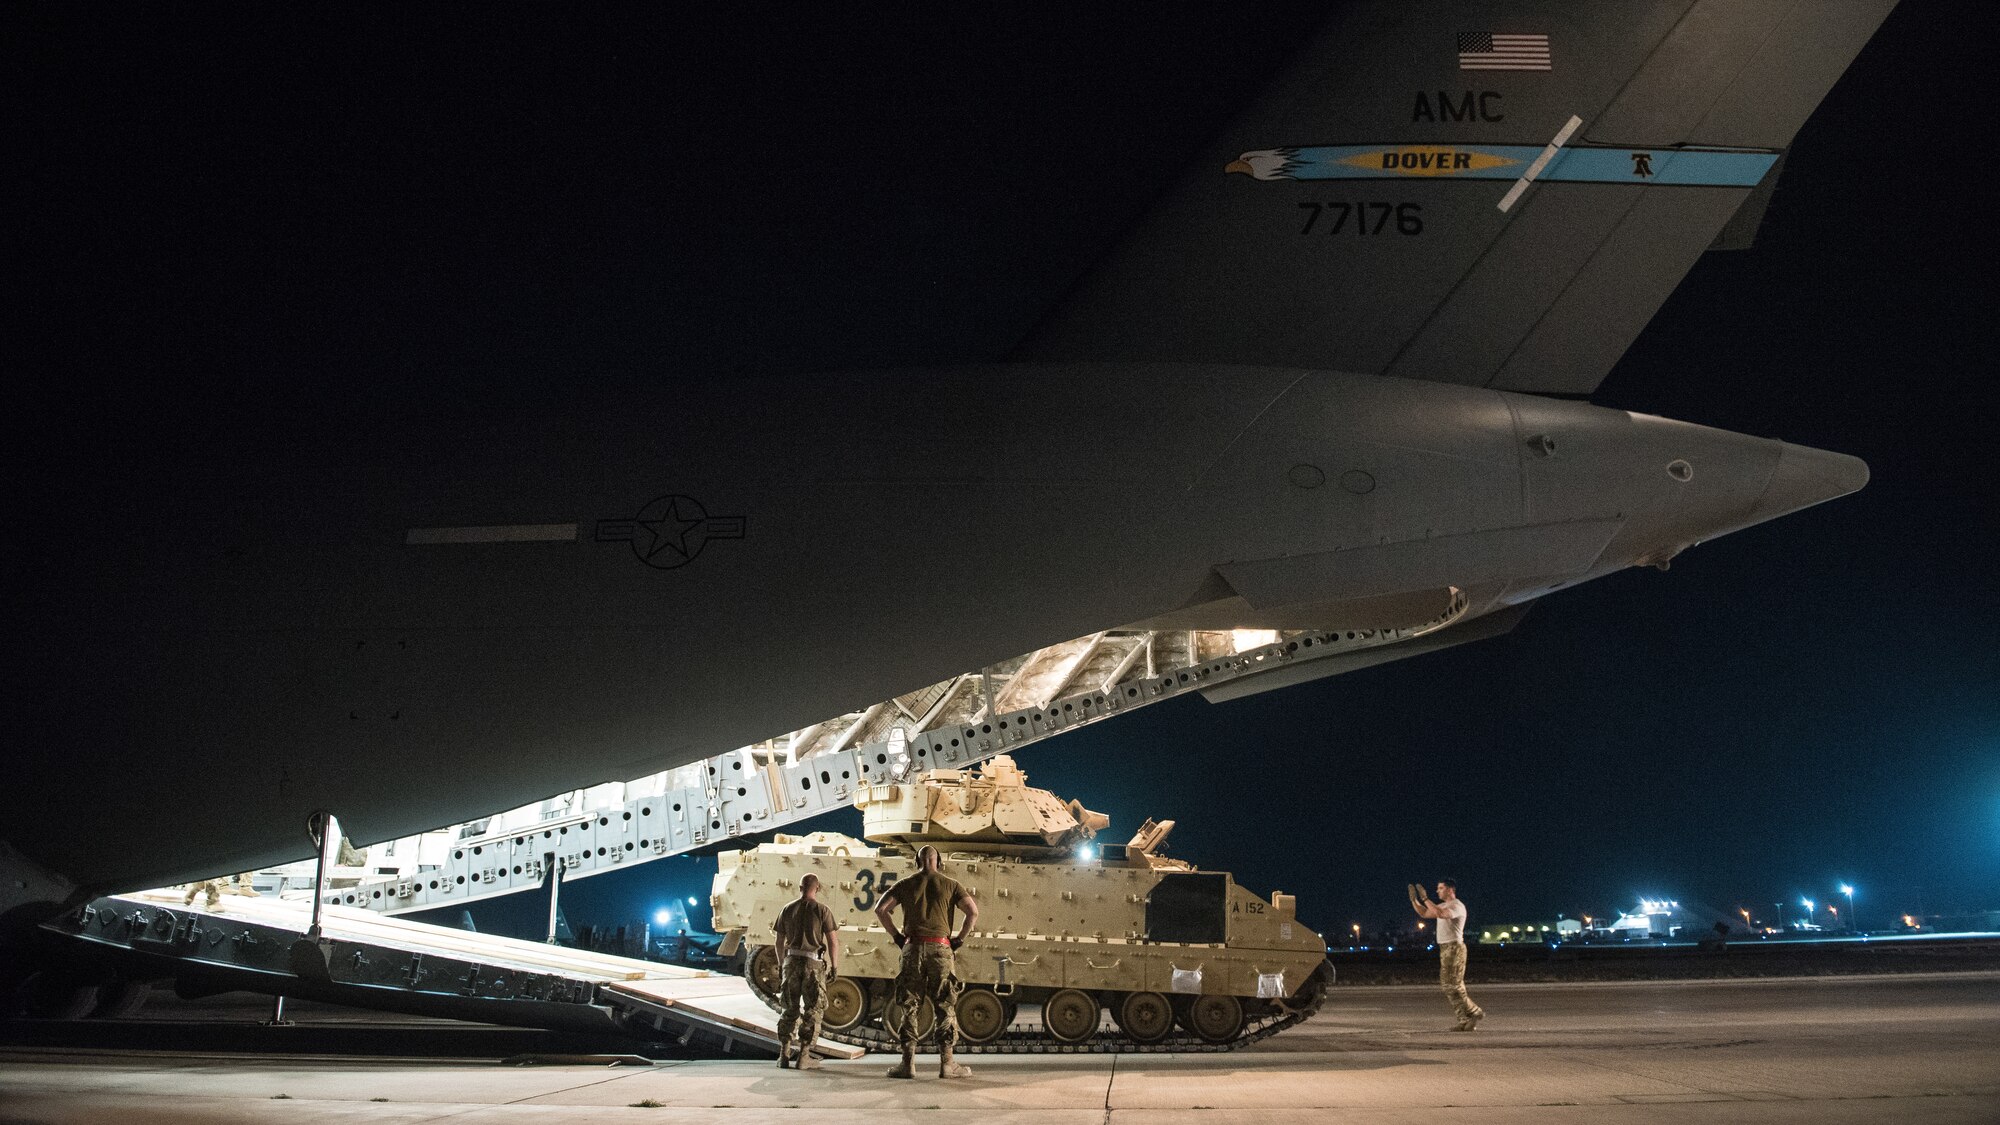 U.S. Airmen assigned to the 386th Expeditionary Logistics Readiness Squadron help guide a U.S. Army Soldier loading an M2 Bradley Fighting Vehicle onto a U.S. Air Force C-17 Globemaster III at Ali Al Salem Air Base, Kuwait, Oct. 30, 2019. Airmen and Soldiers coordinated efforts to transport the BFV within the U.S. Central Command theater of operations to assist in ongoing efforts within the region. (U.S. Air Force photo by Capt. Thomas Barger)